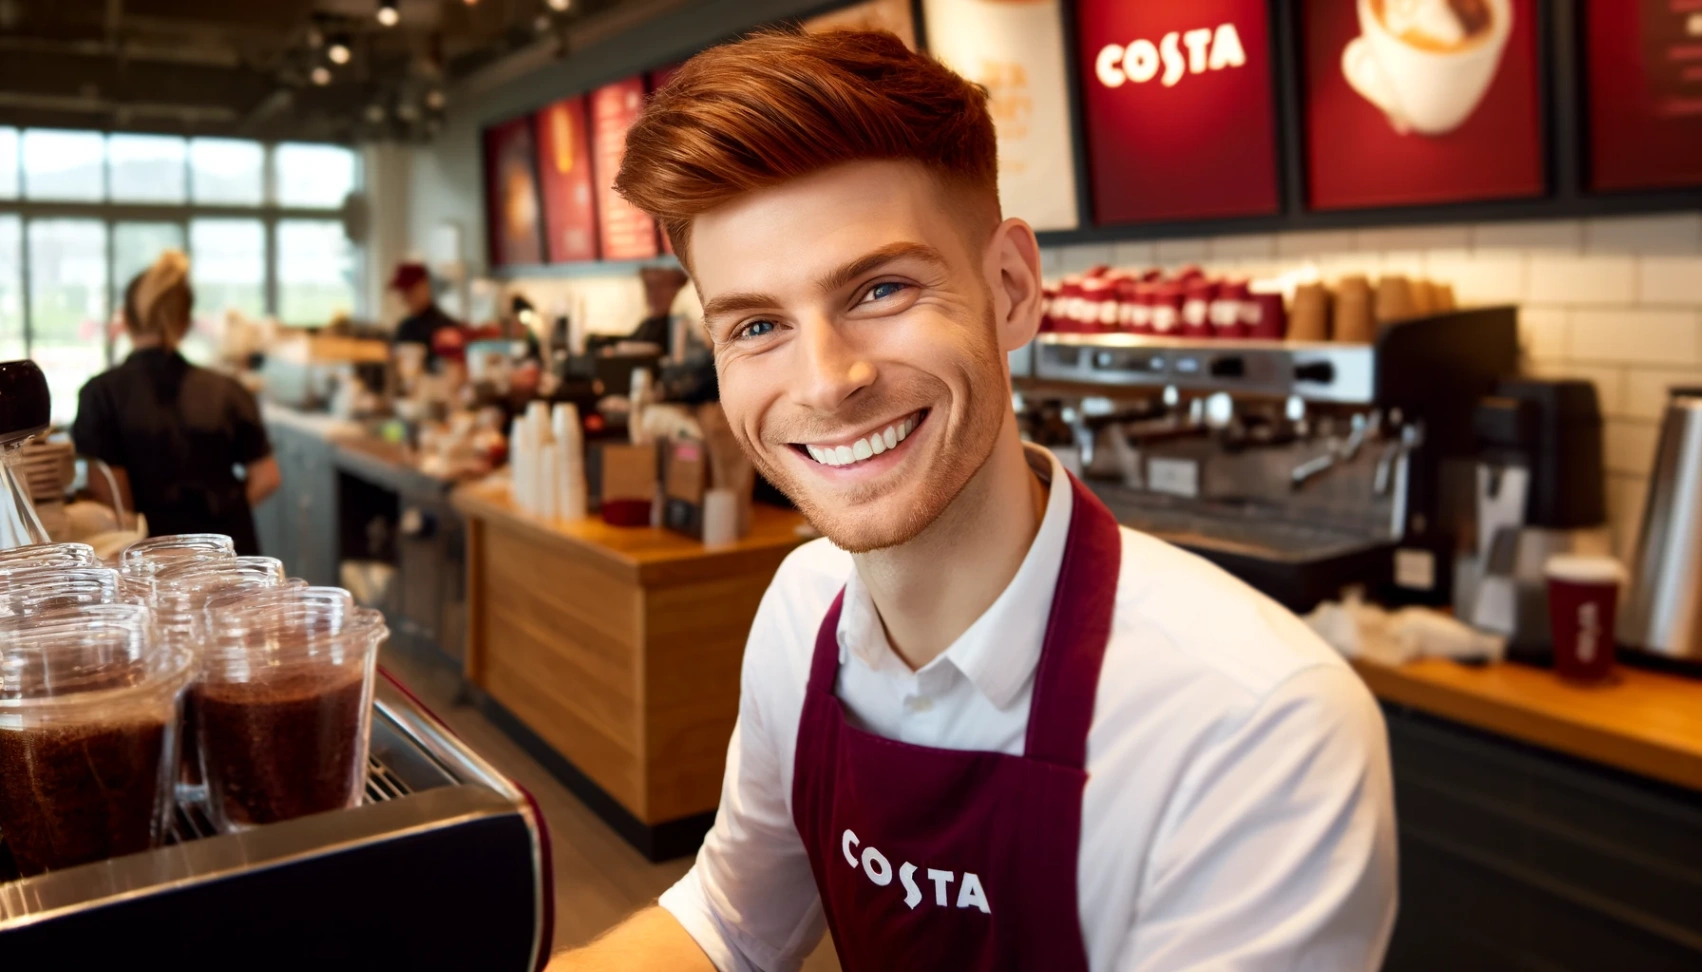 Job Openings at Costa Coffee: Learn How to Apply